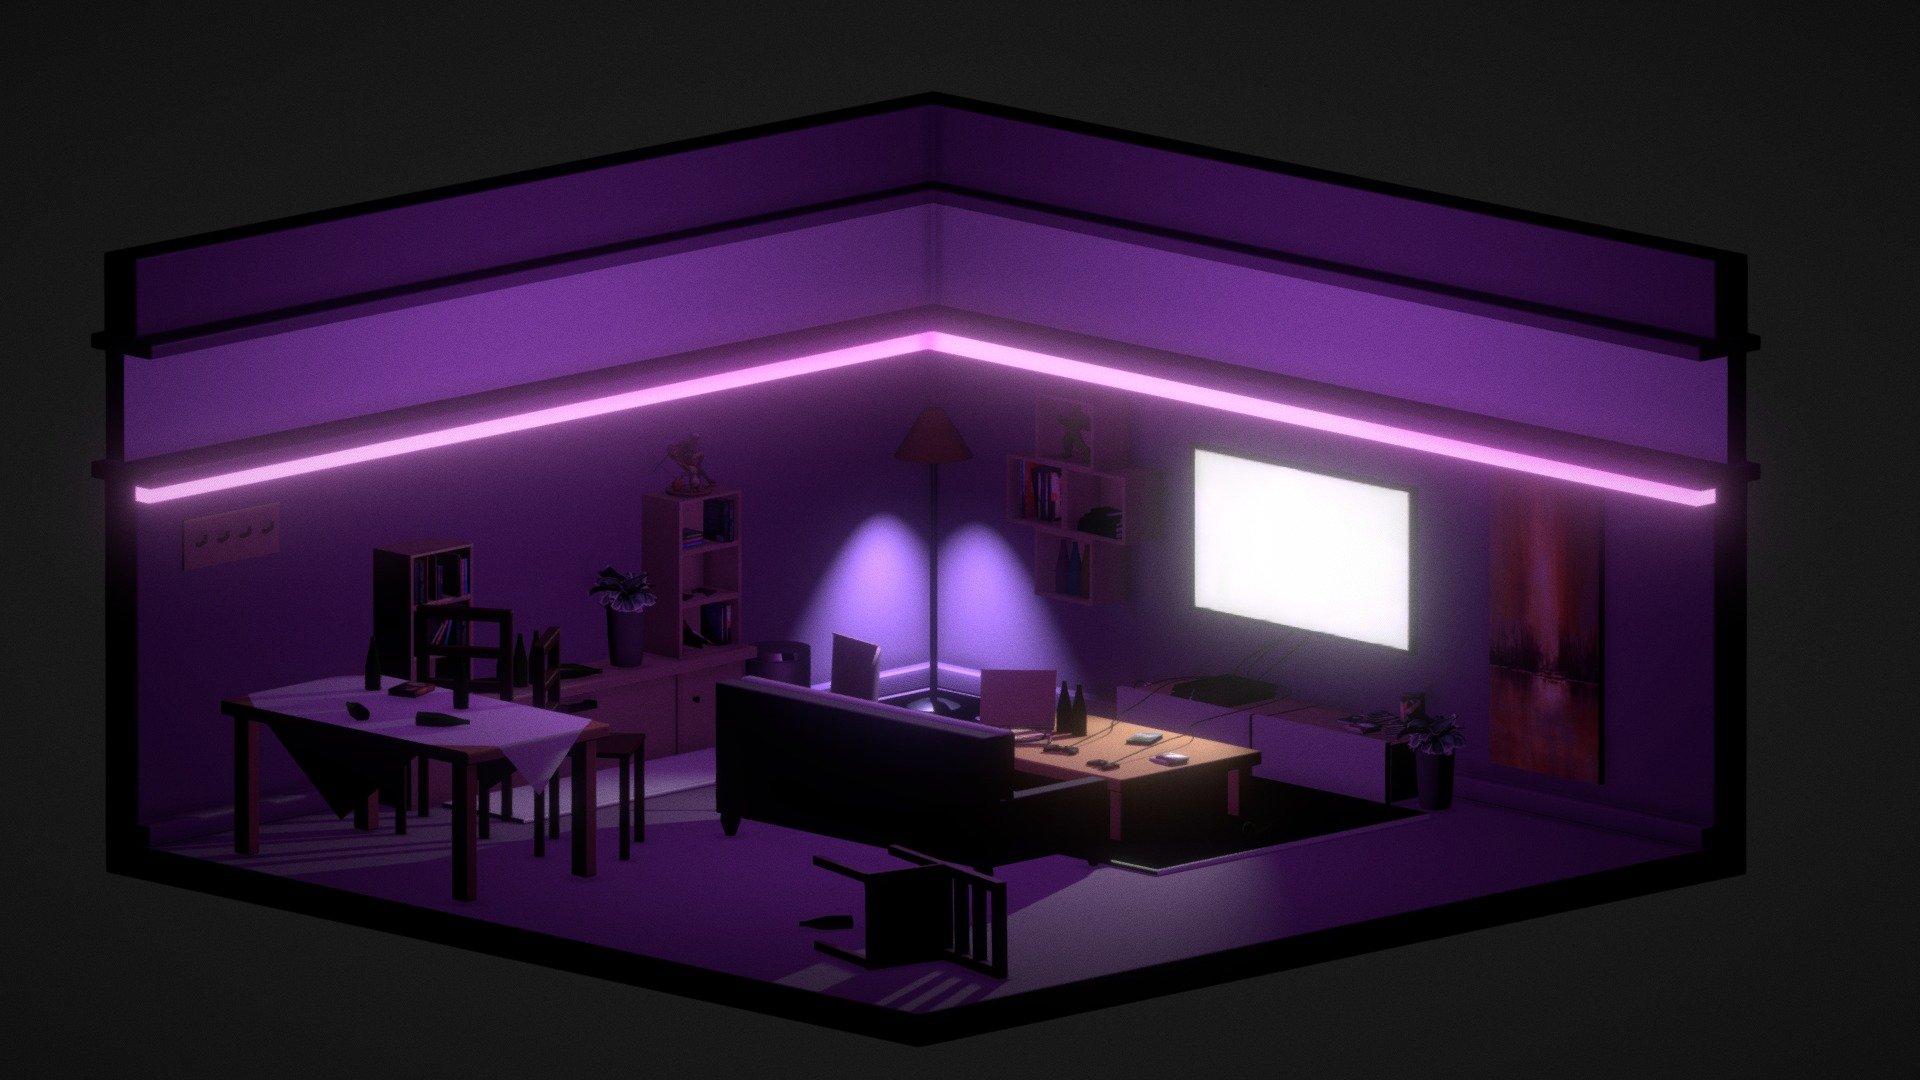 Orthographic game party room made by me, in Blender.
Credits for people who made the figures and books;
@Thimeo &ldquo;Kyouko Kirigiri figure from Danganronpa